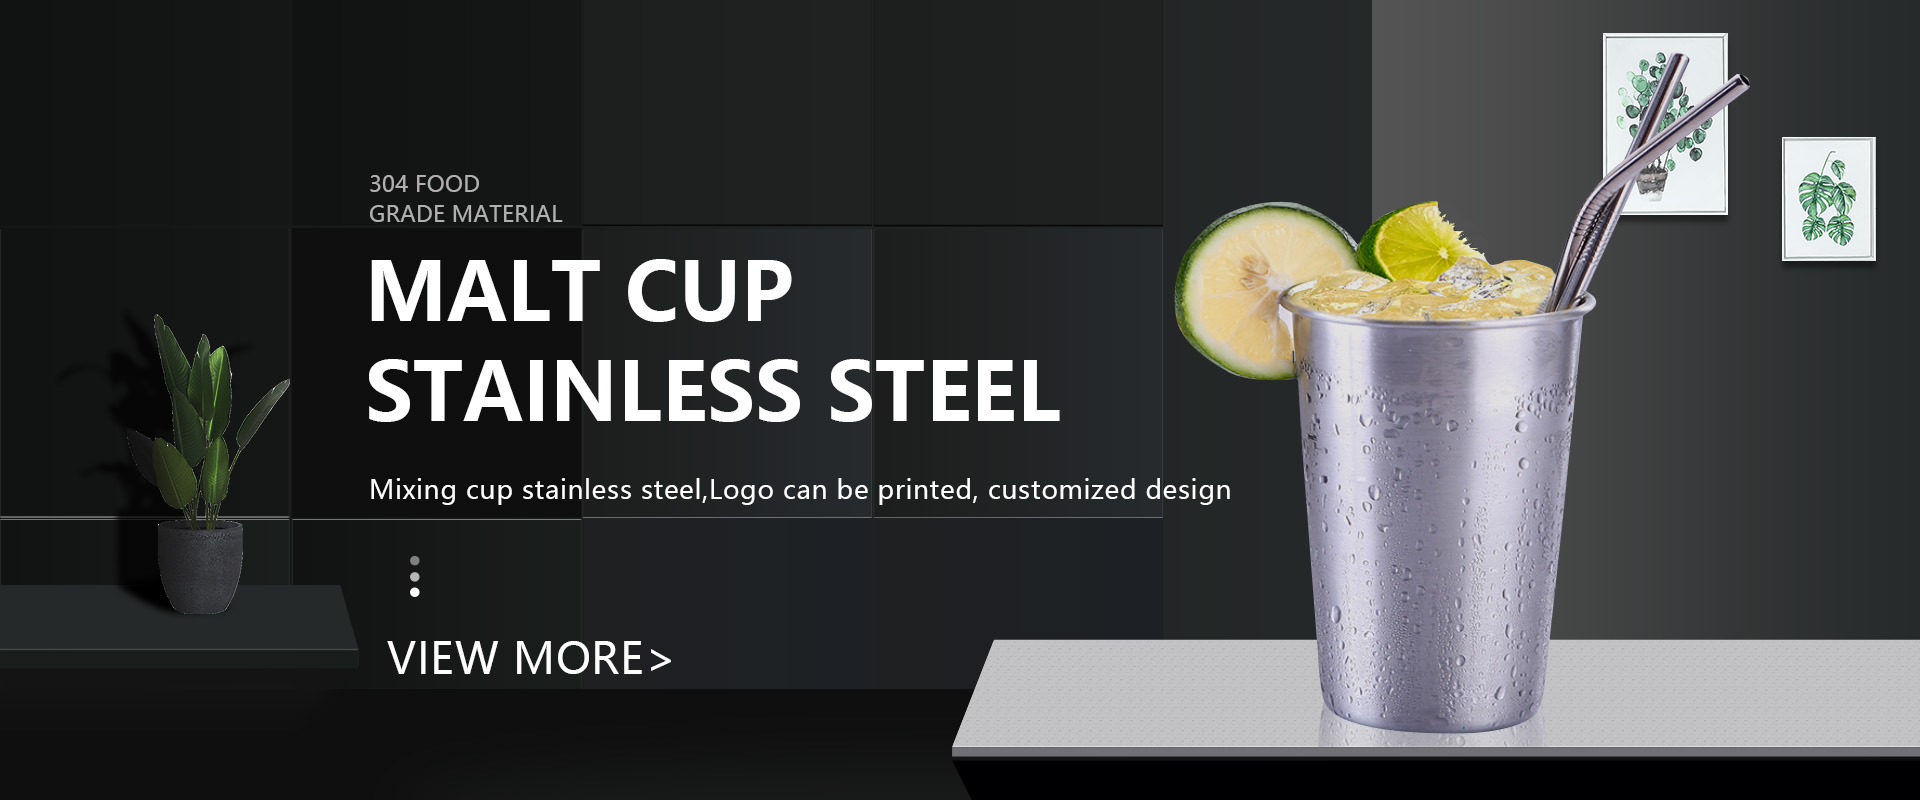 Malt cup stainless steel